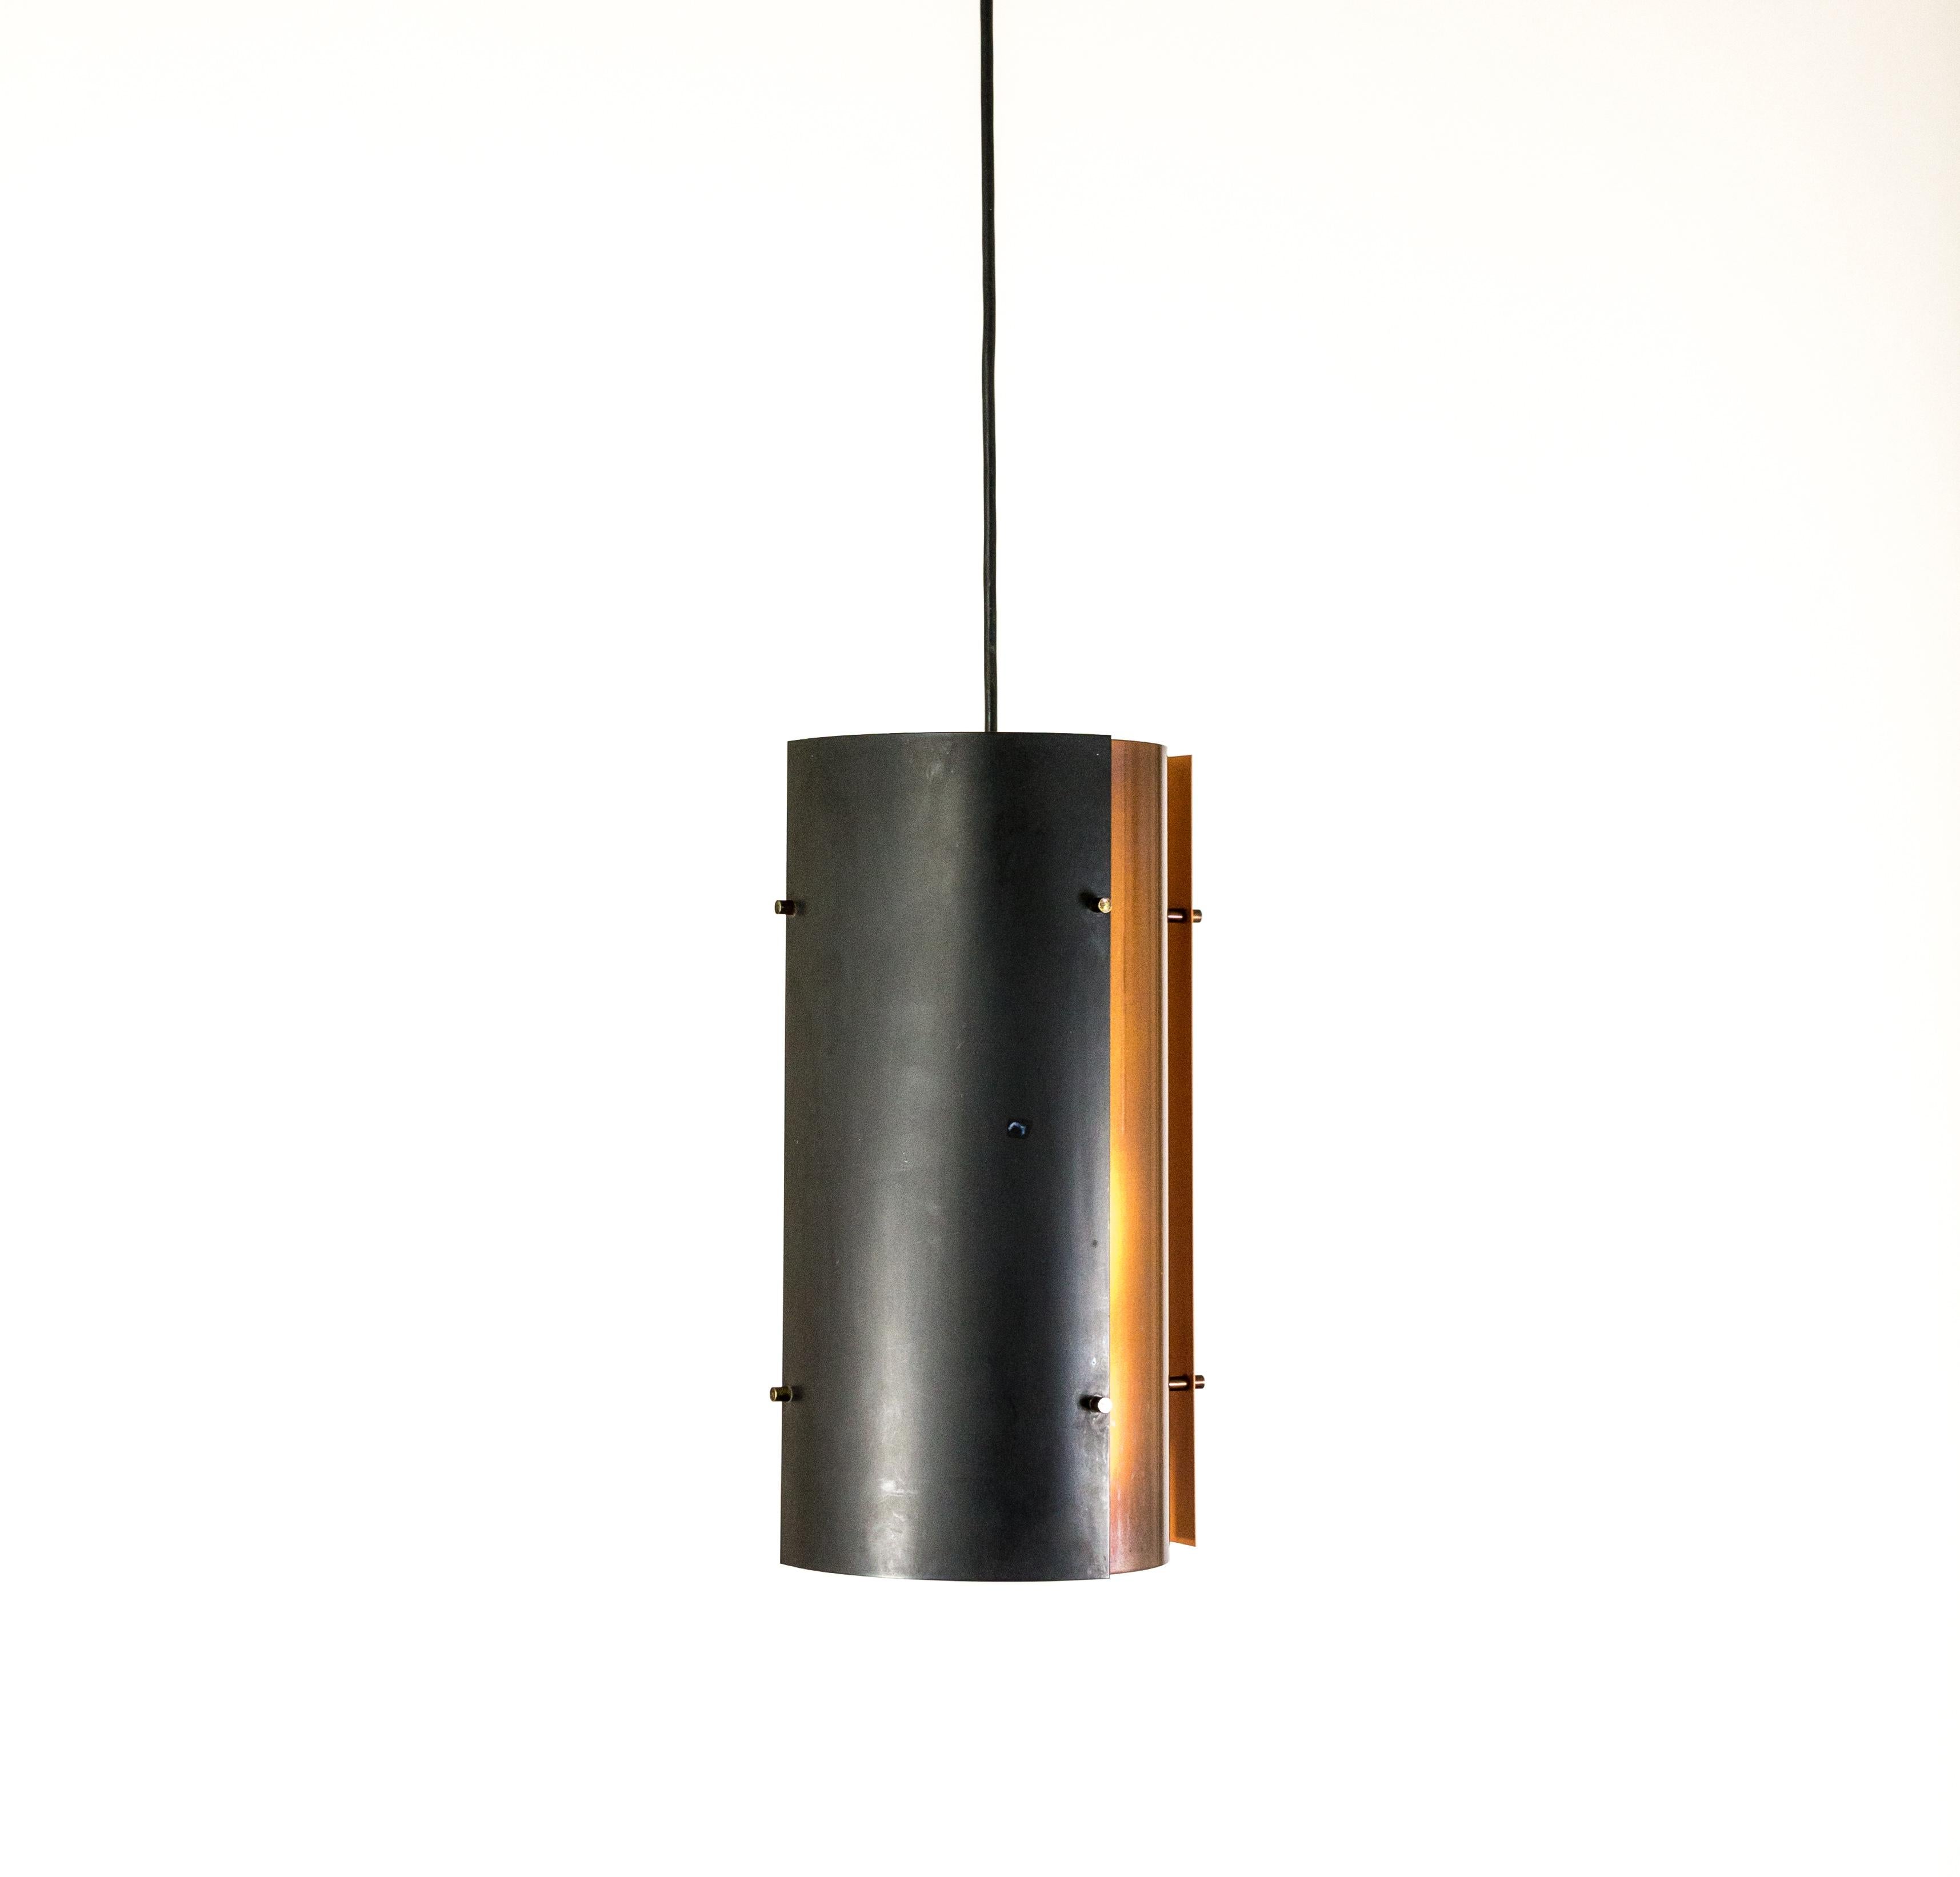 Copper and black colored pendant by Fog & Mørup. The lamp consists of four segments: two black ones with orange on the inside and two copper colored pieces which are white on the inside.

The designer is unknown but the combination of colors and